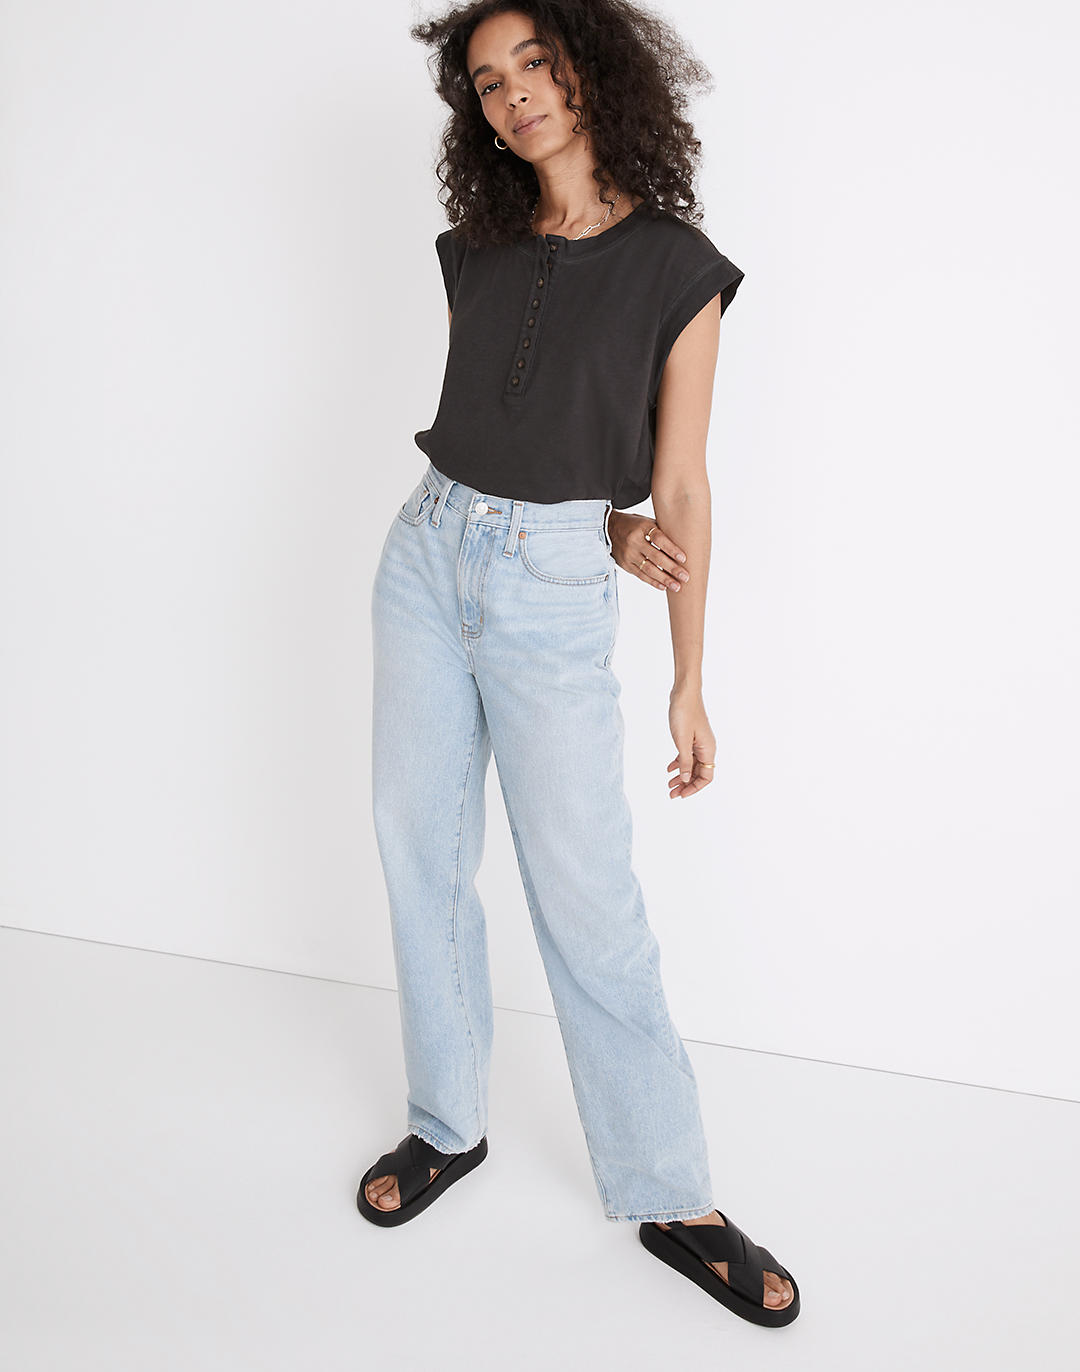 Denim Trends for Fall 2022: slouchy straight leg jeans